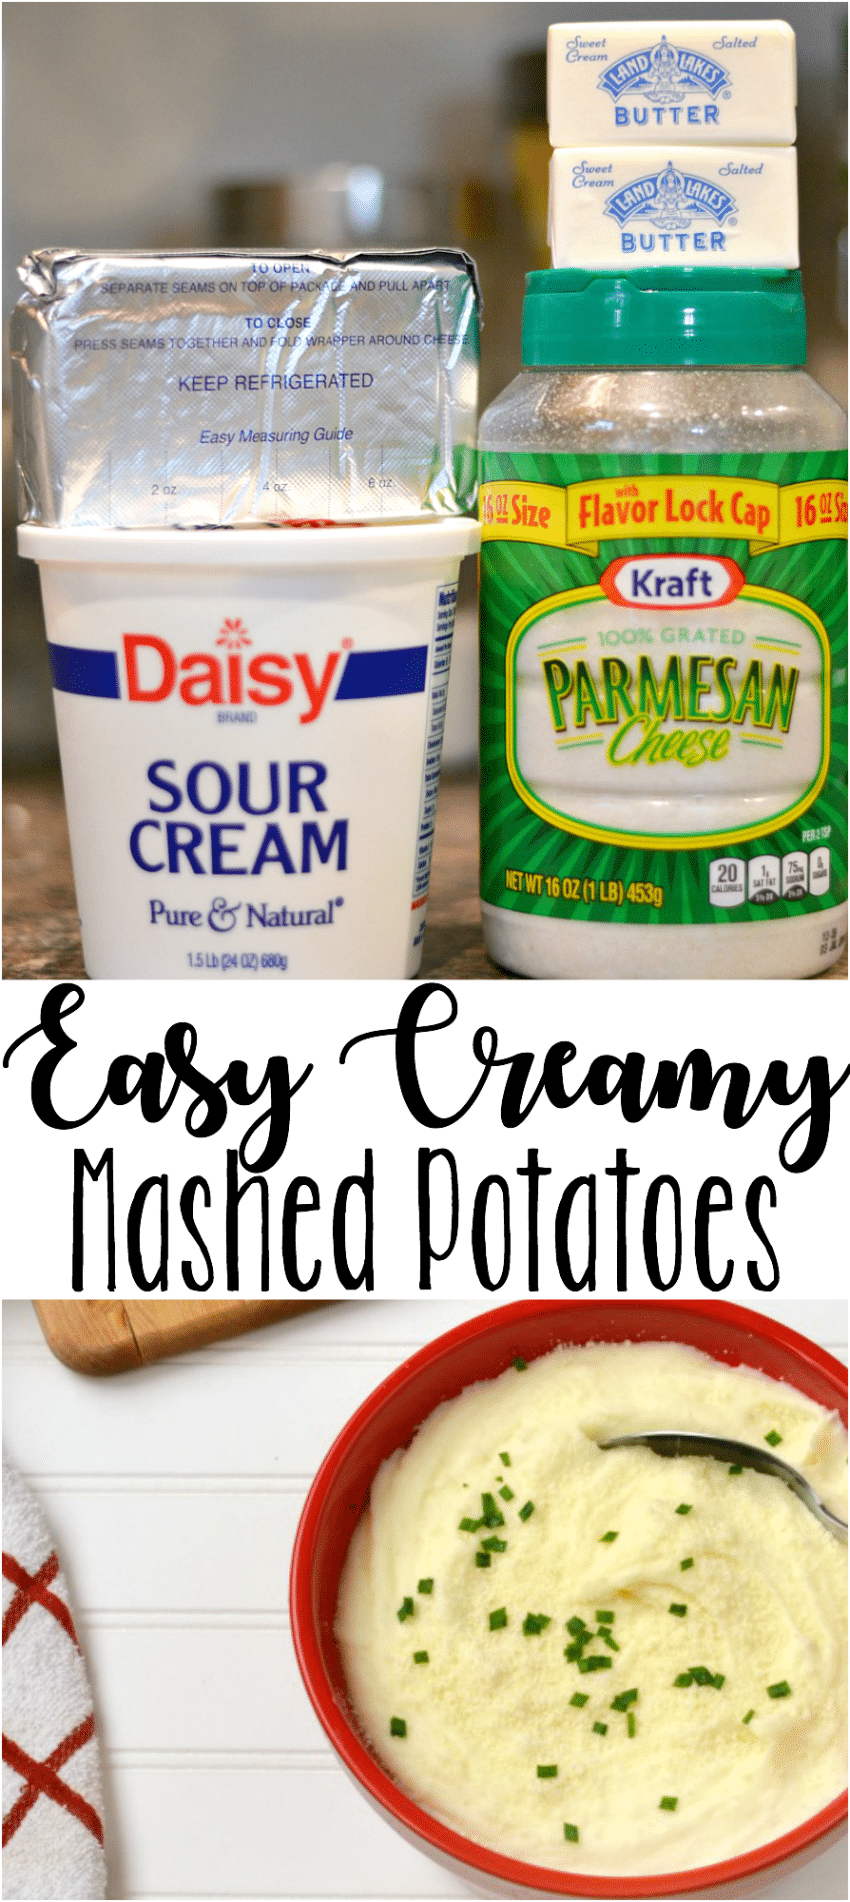 Easy creamy mashed potato recipe! Easy to make and sure to be a hit!